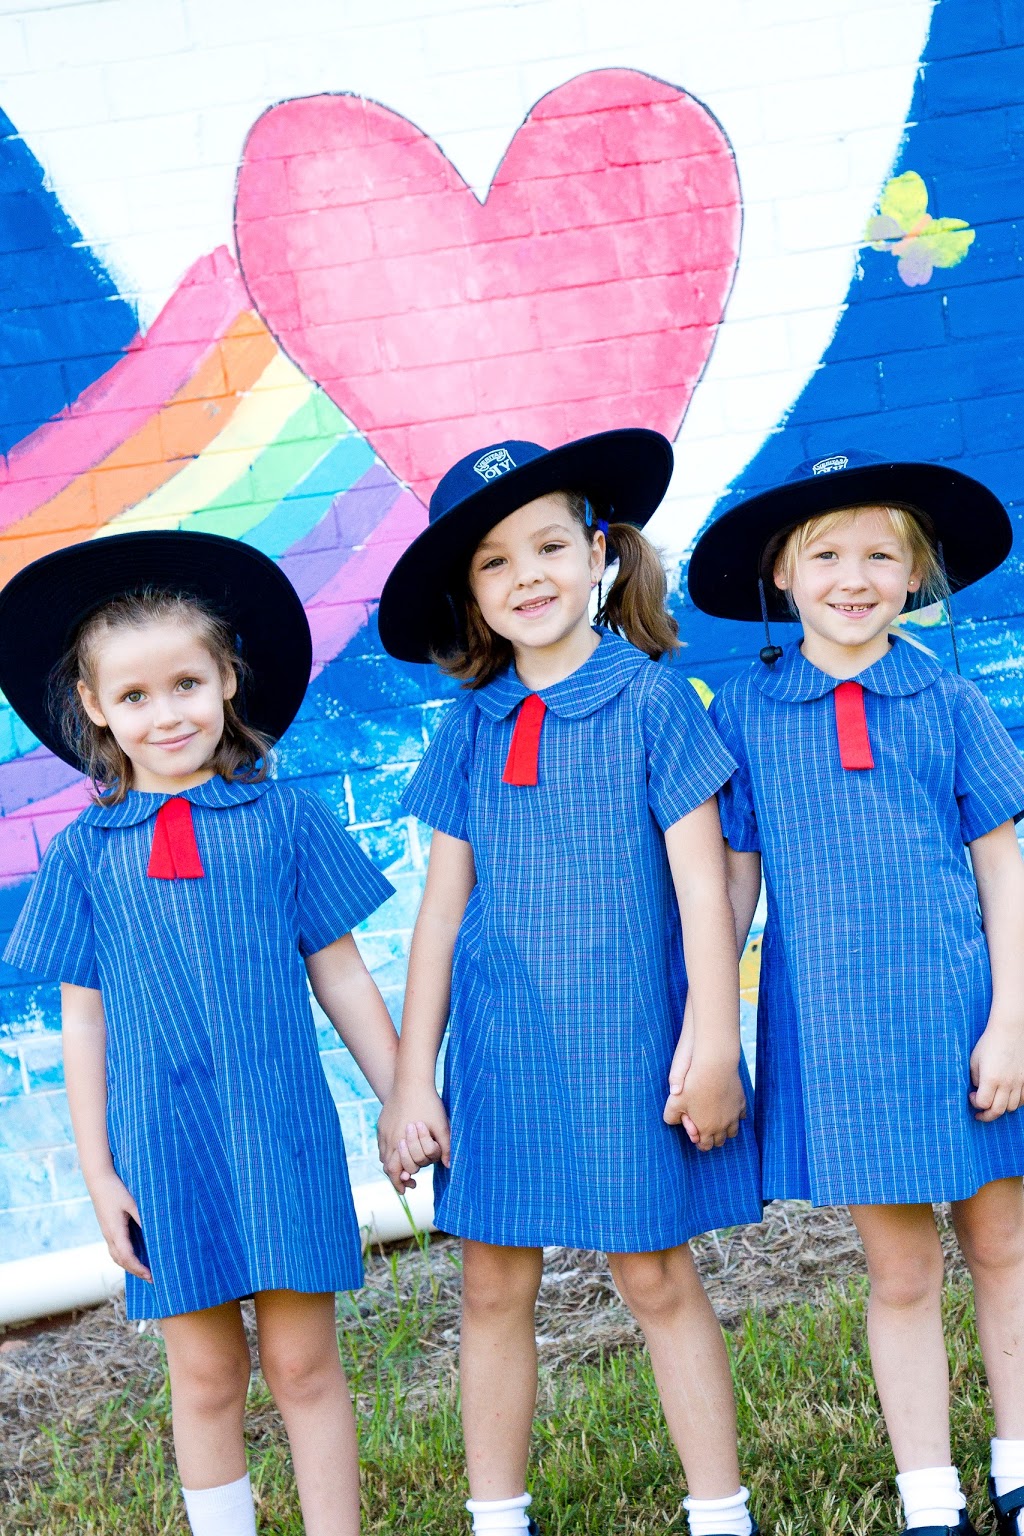 Our Lady of Victories Primary School | school | 15 Lovell Parade, Shortland NSW 2307, Australia | 0249511003 OR +61 2 4951 1003